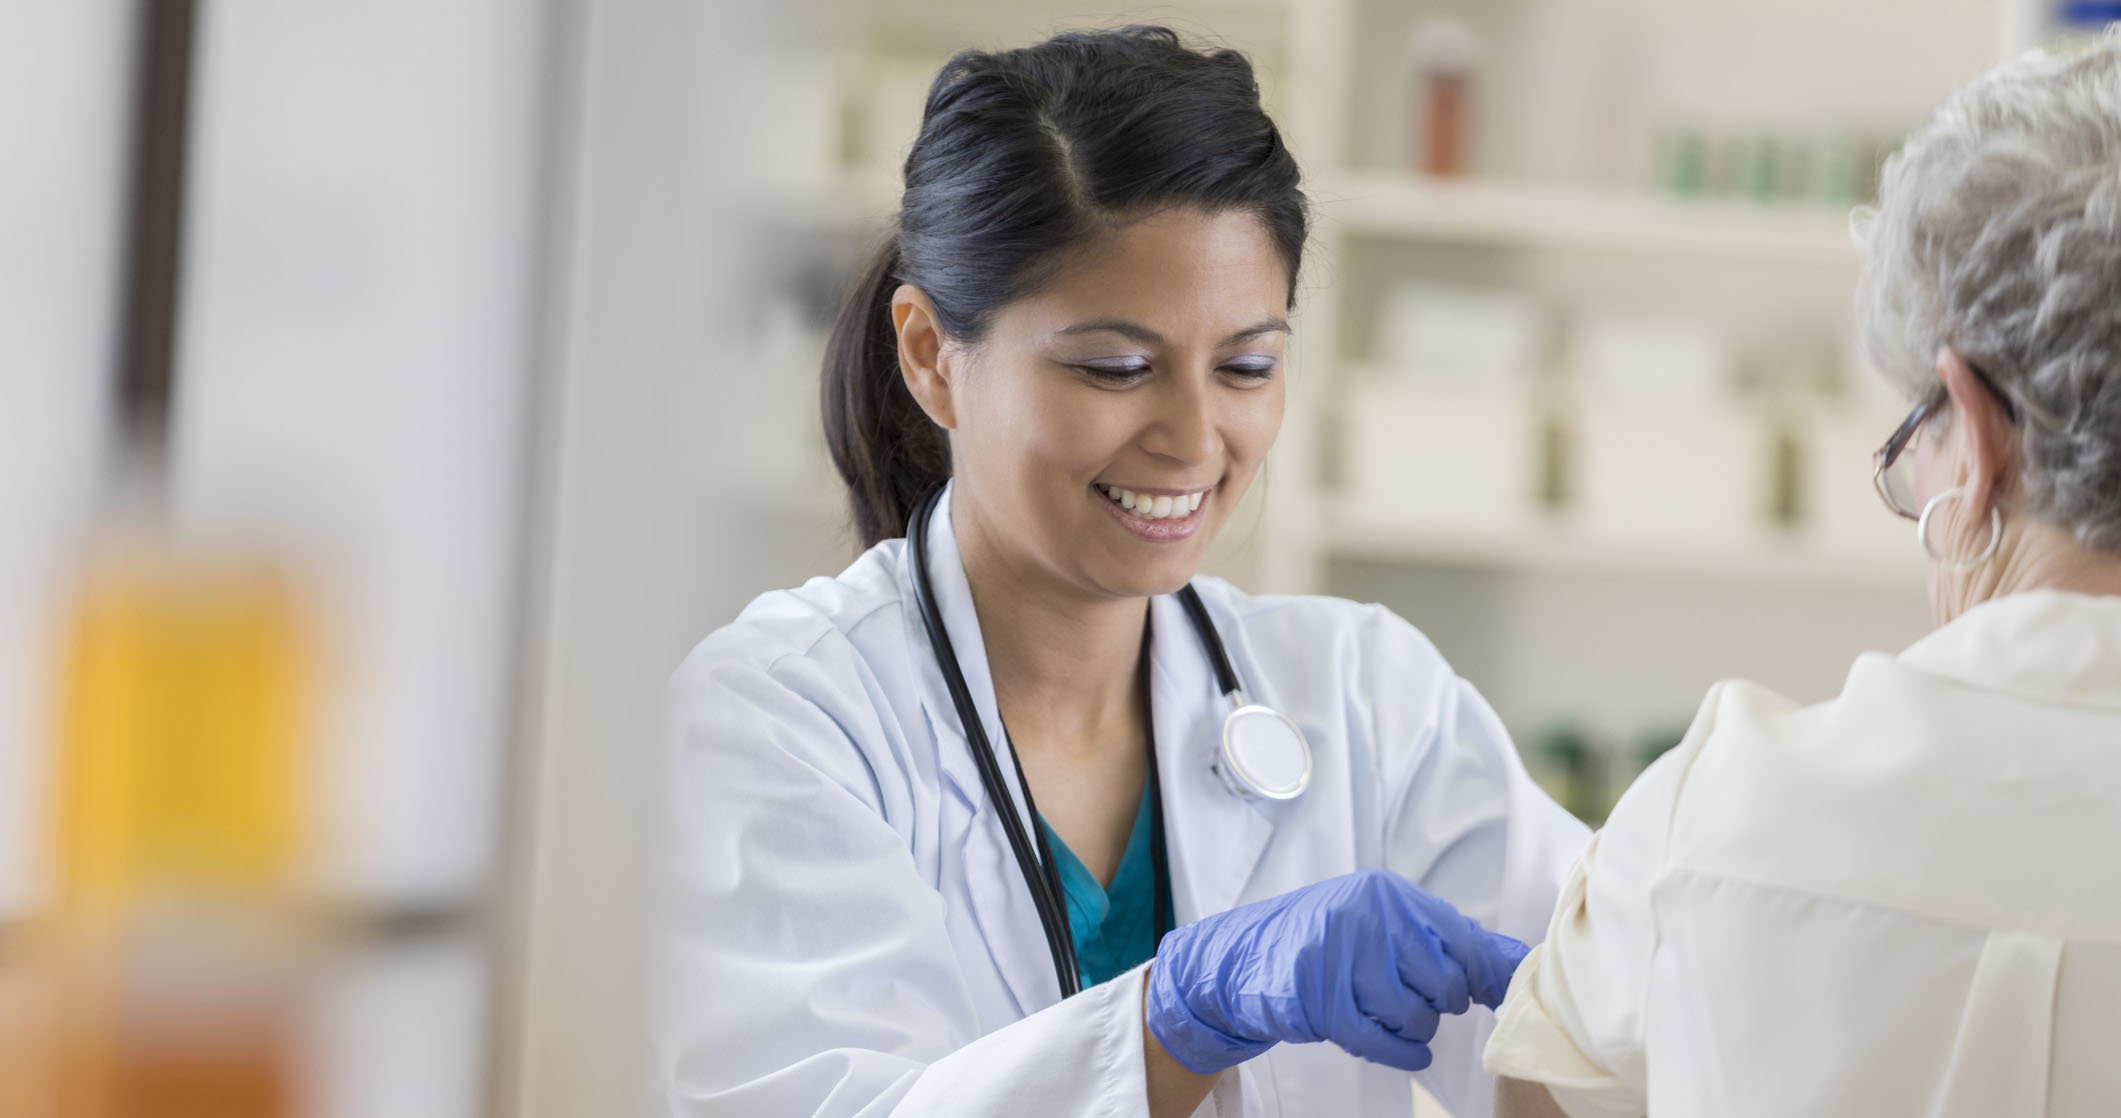 A smiling young pharmacist dons a stethoscope and completes her senior customer's flu shot by placing a band-aid on her upper arm.  She is wearing medical gloves and a lab coat.  There are shelves in the background.